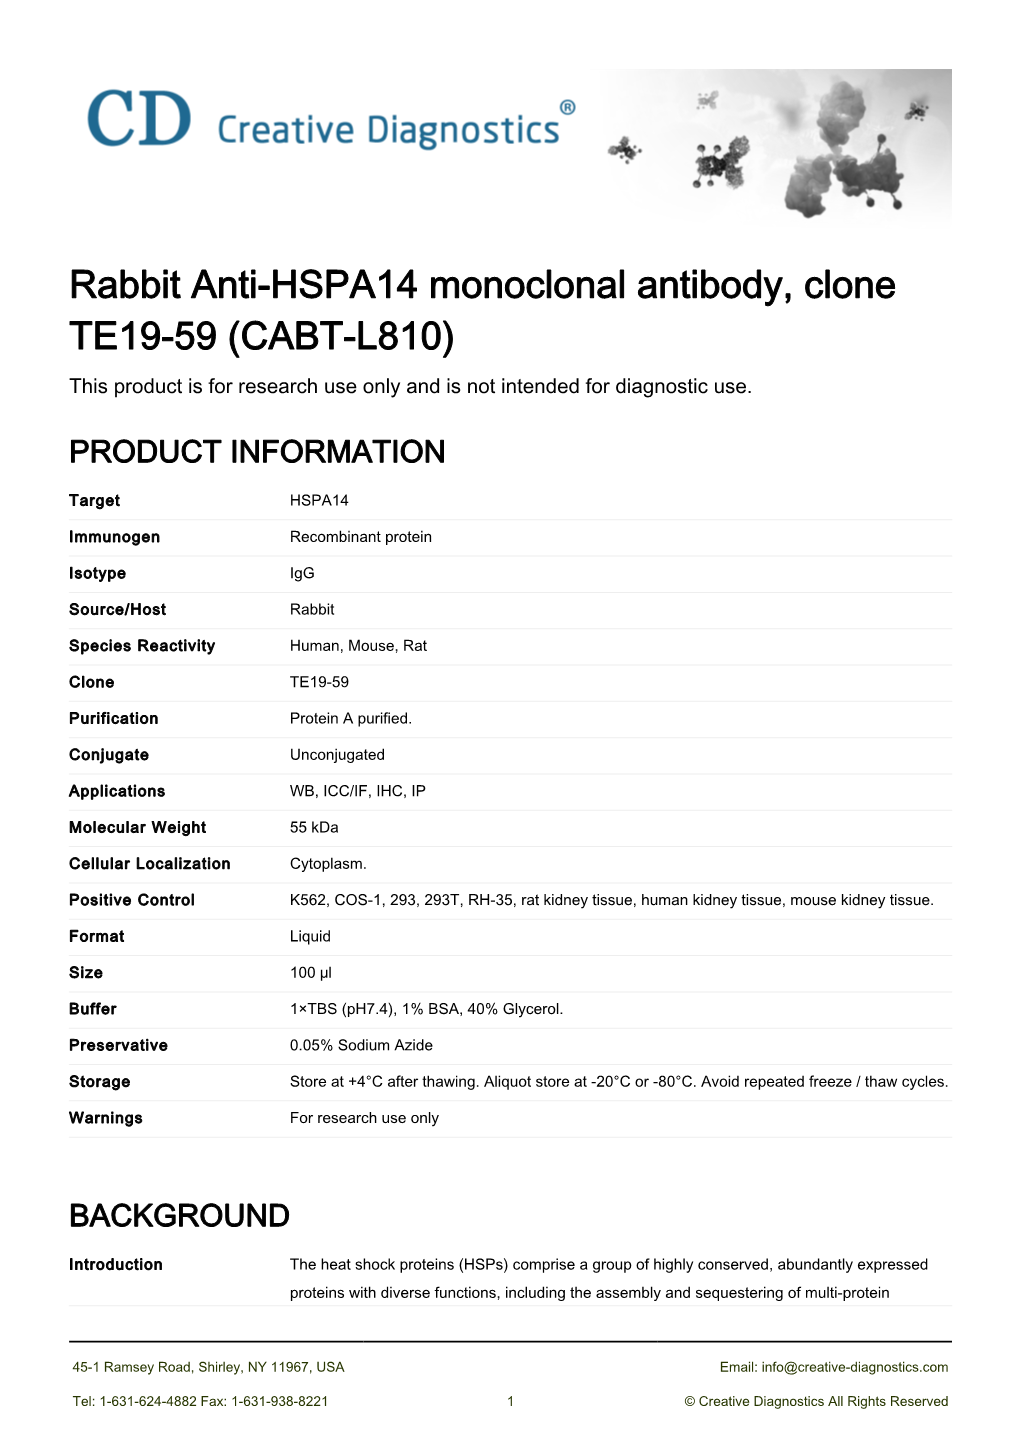 Rabbit Anti-HSPA14 Monoclonal Antibody, Clone TE19-59 (CABT-L810) This Product Is for Research Use Only and Is Not Intended for Diagnostic Use